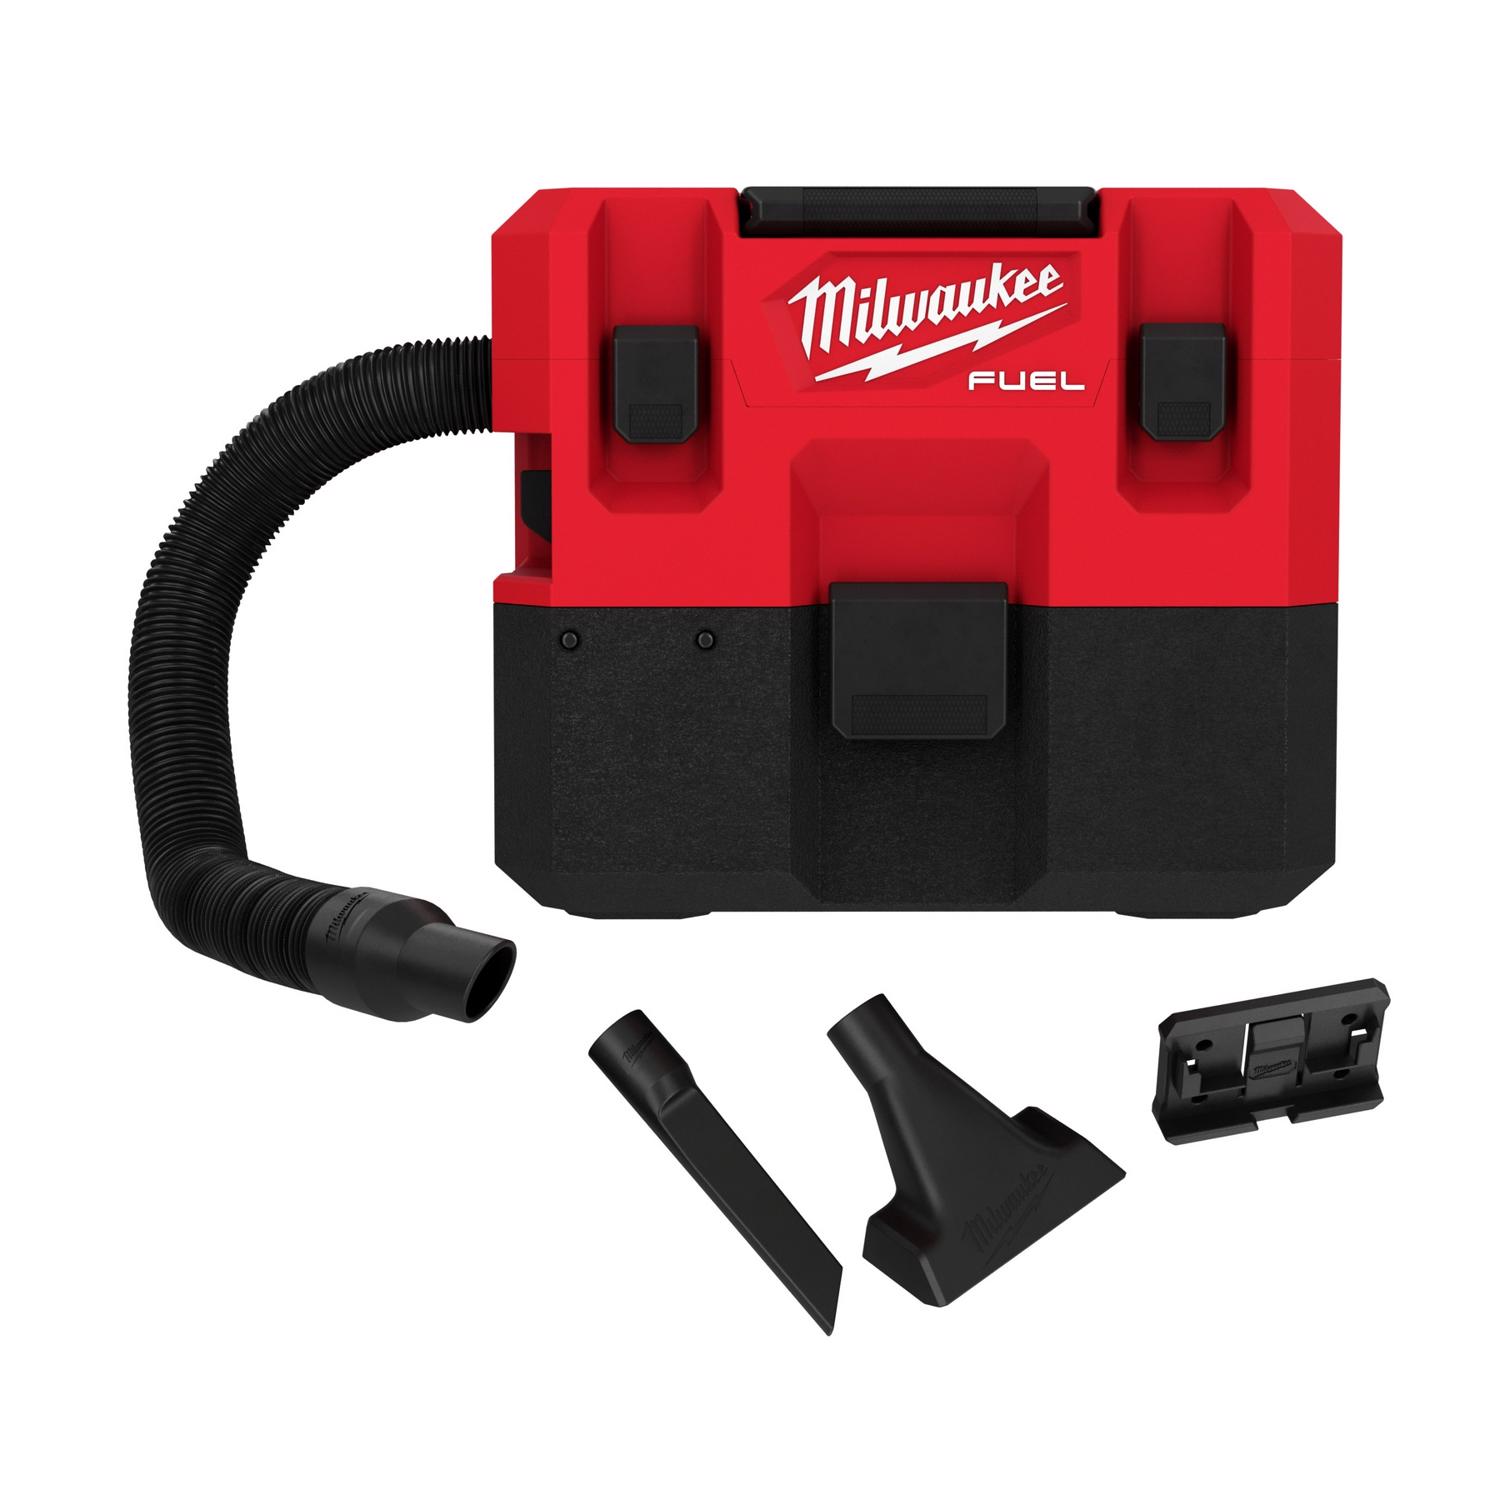 Photos - Baby Hygiene Milwaukee M12 FUEL 0960-20 1.6 gal Cordless Shop Vacuum Tool Only 12 V 